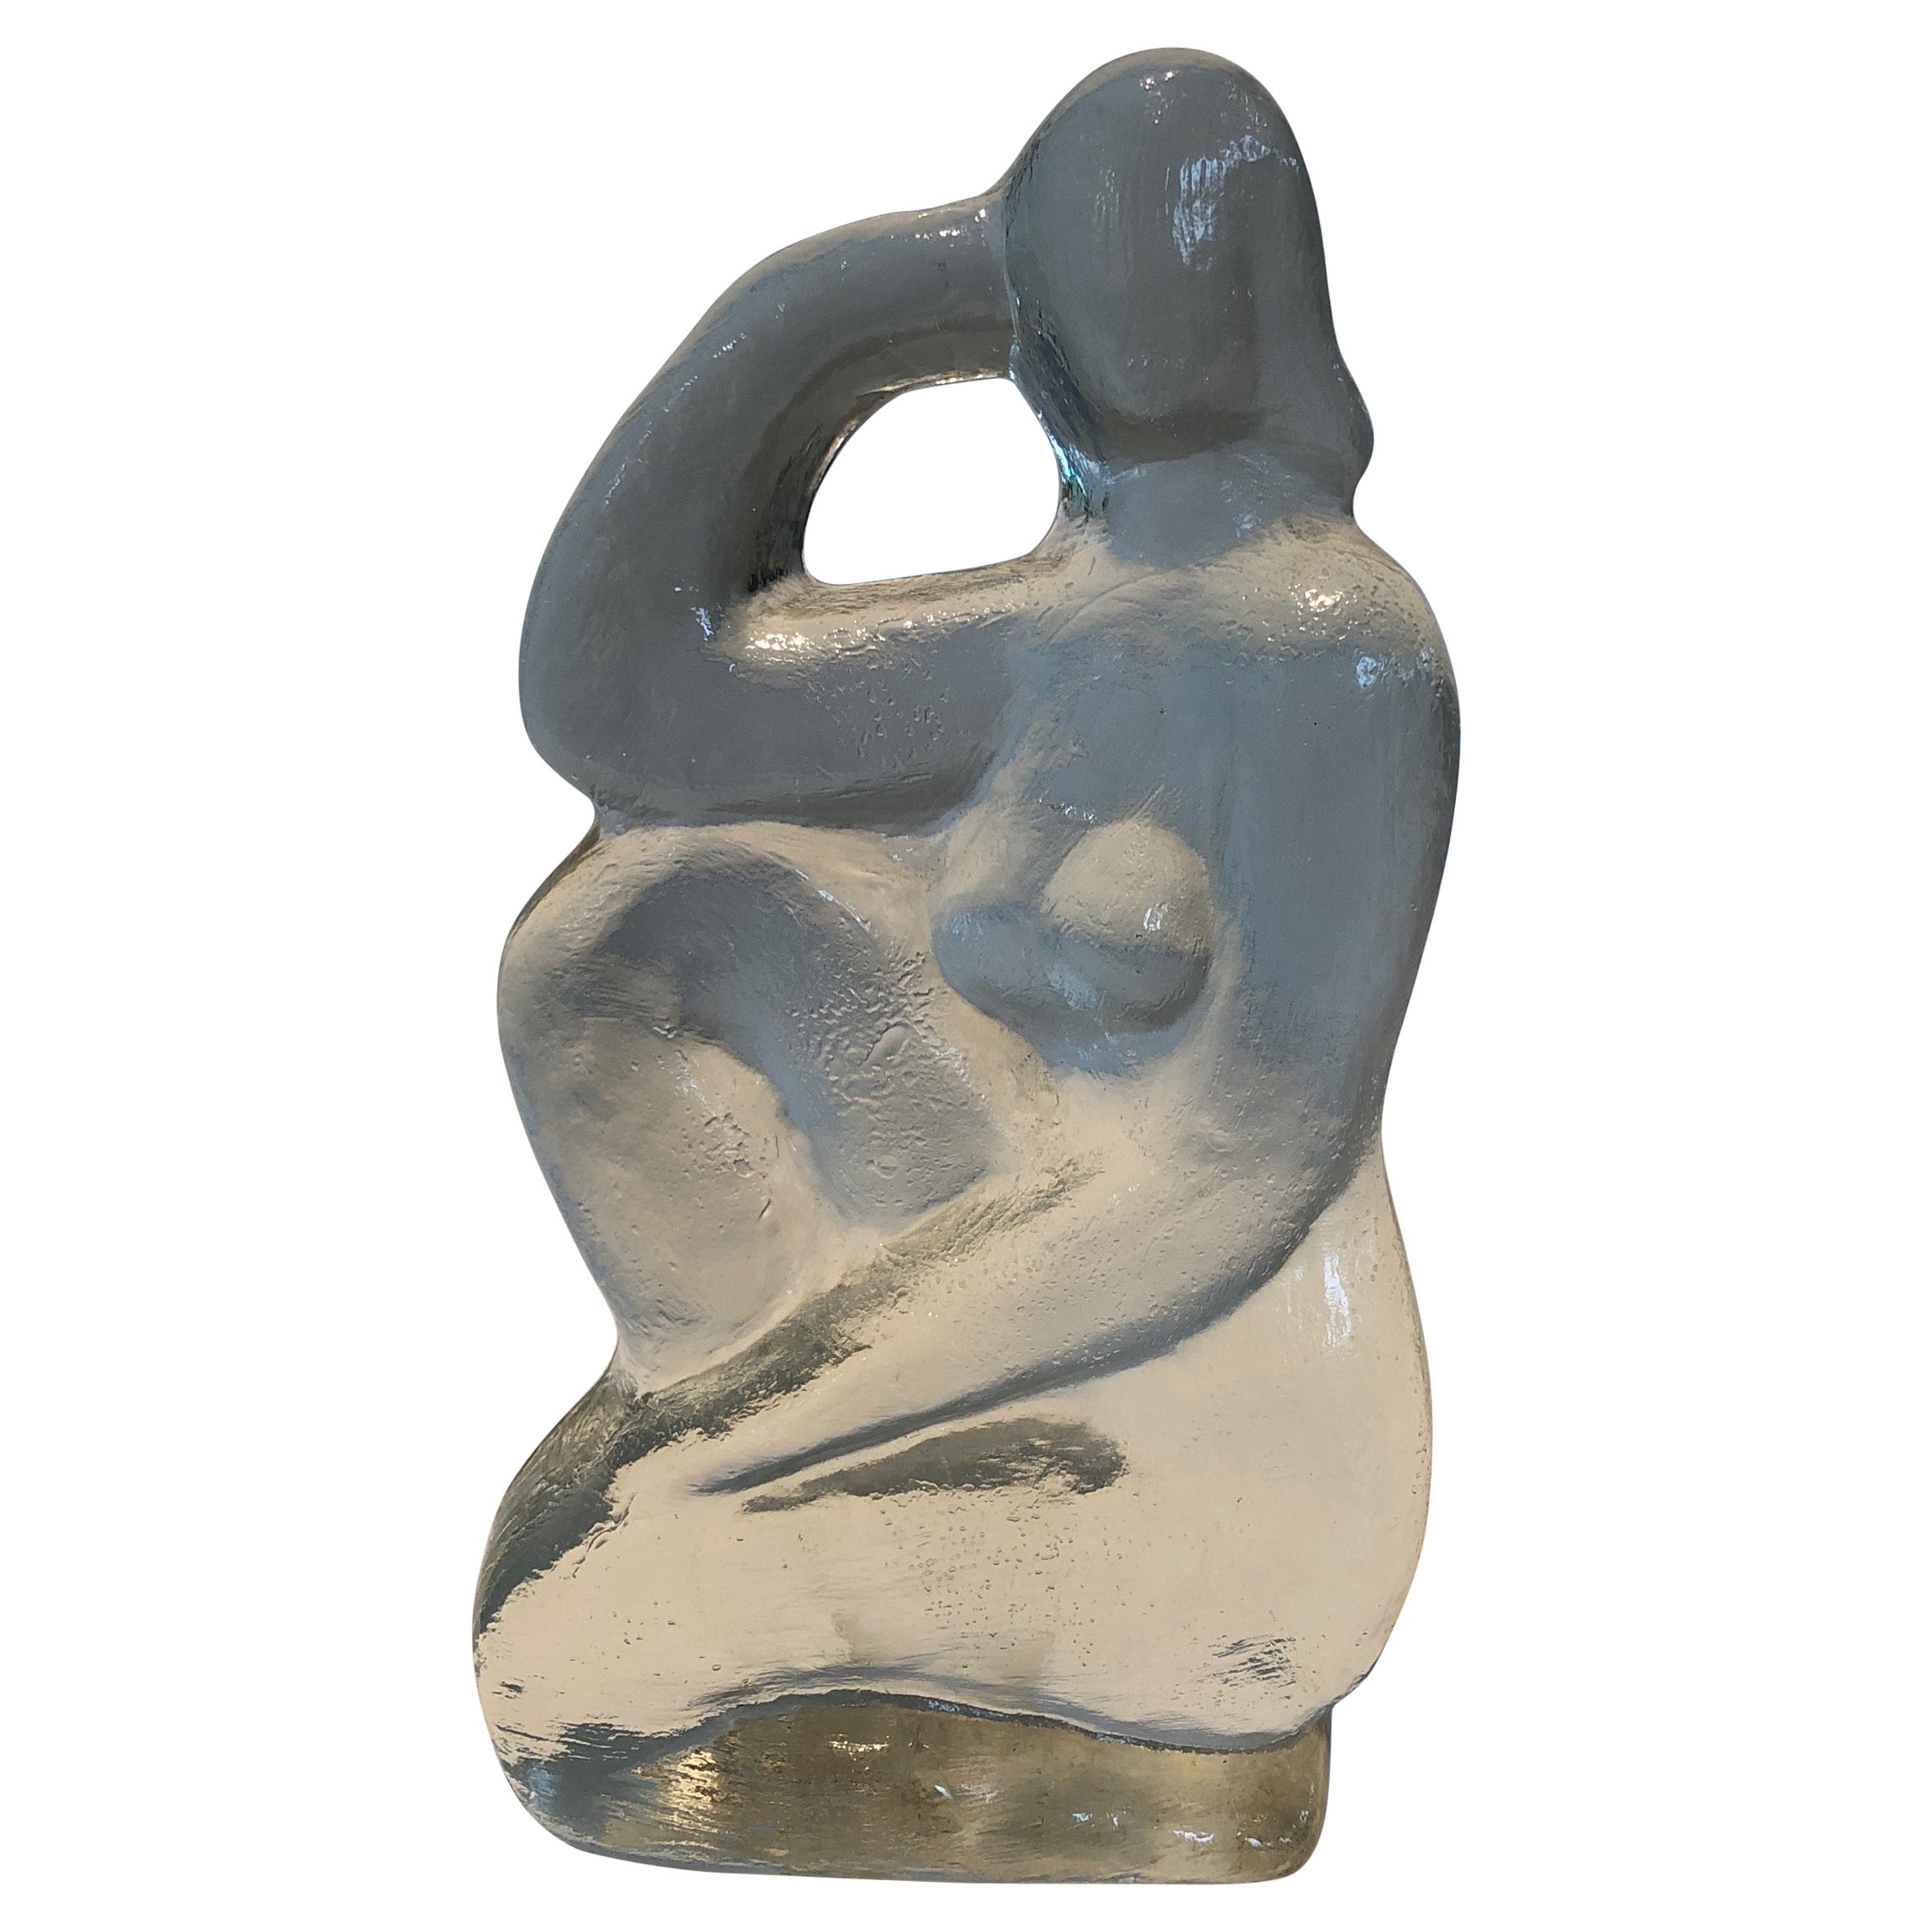 Glass sculpture representing a naked woman posing  in the French Art Deco Style